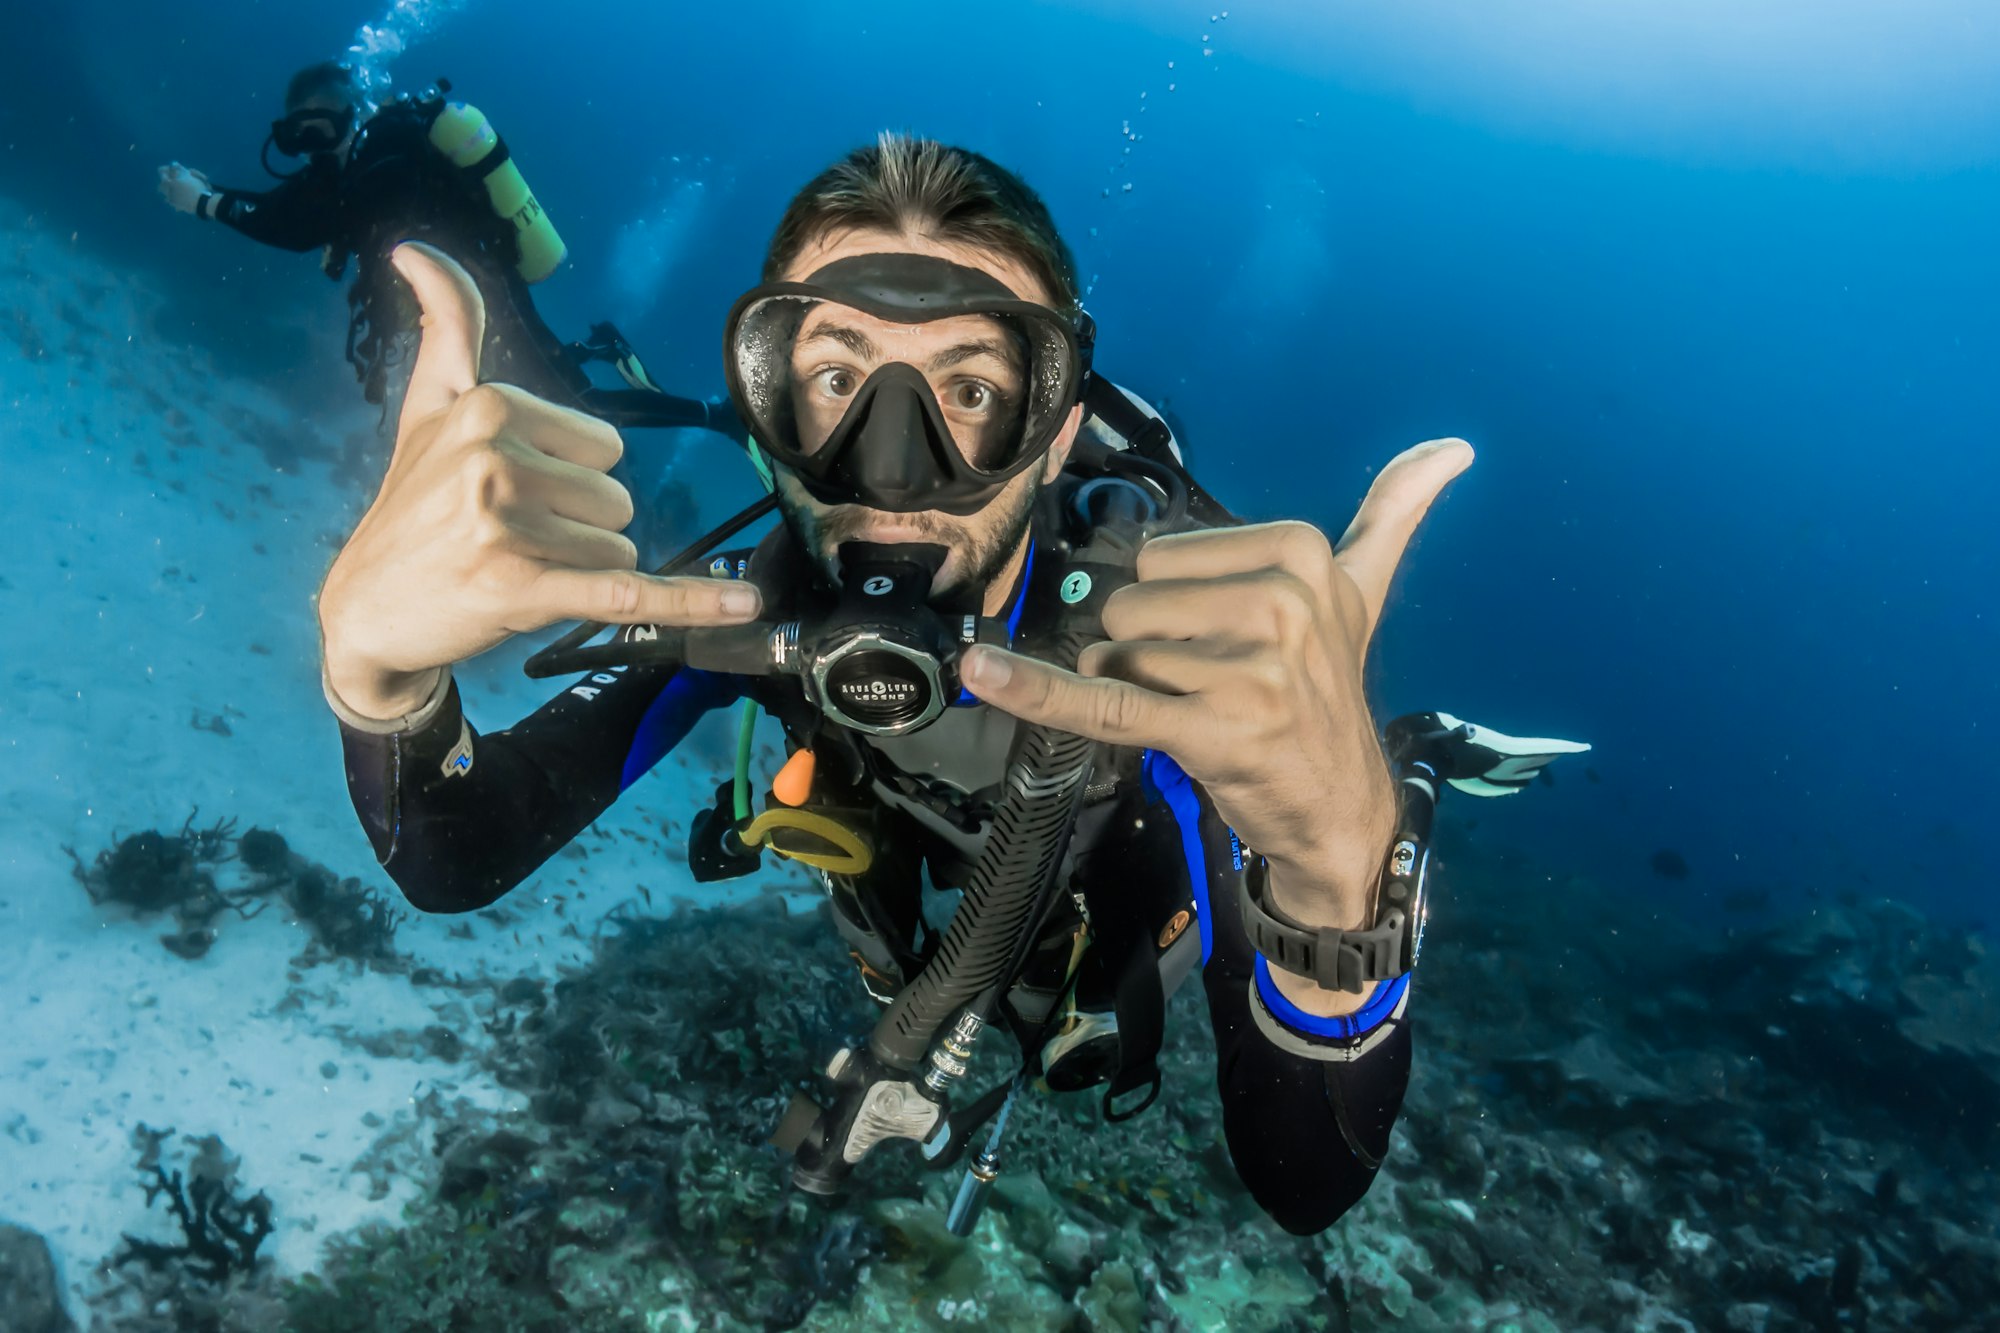 EXPLORE THE OCEANS AND SEAS WITH THE BEST SCUBA DIVING EQUIPMENT